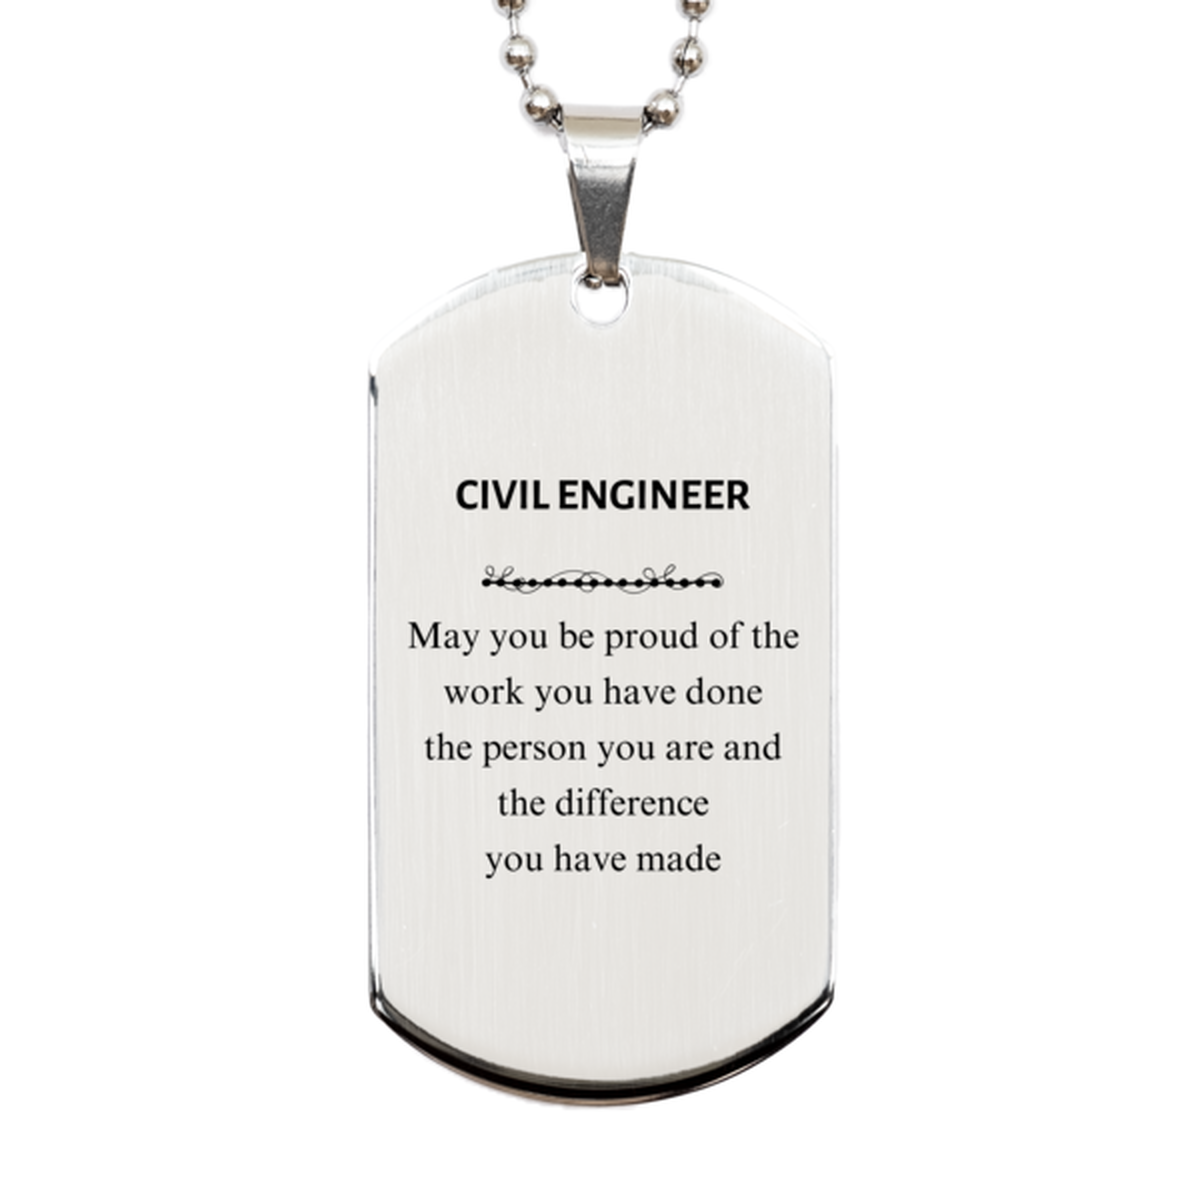 Civil Engineer May you be proud of the work you have done, Retirement Civil Engineer Silver Dog Tag for Colleague Appreciation Gifts Amazing for Civil Engineer